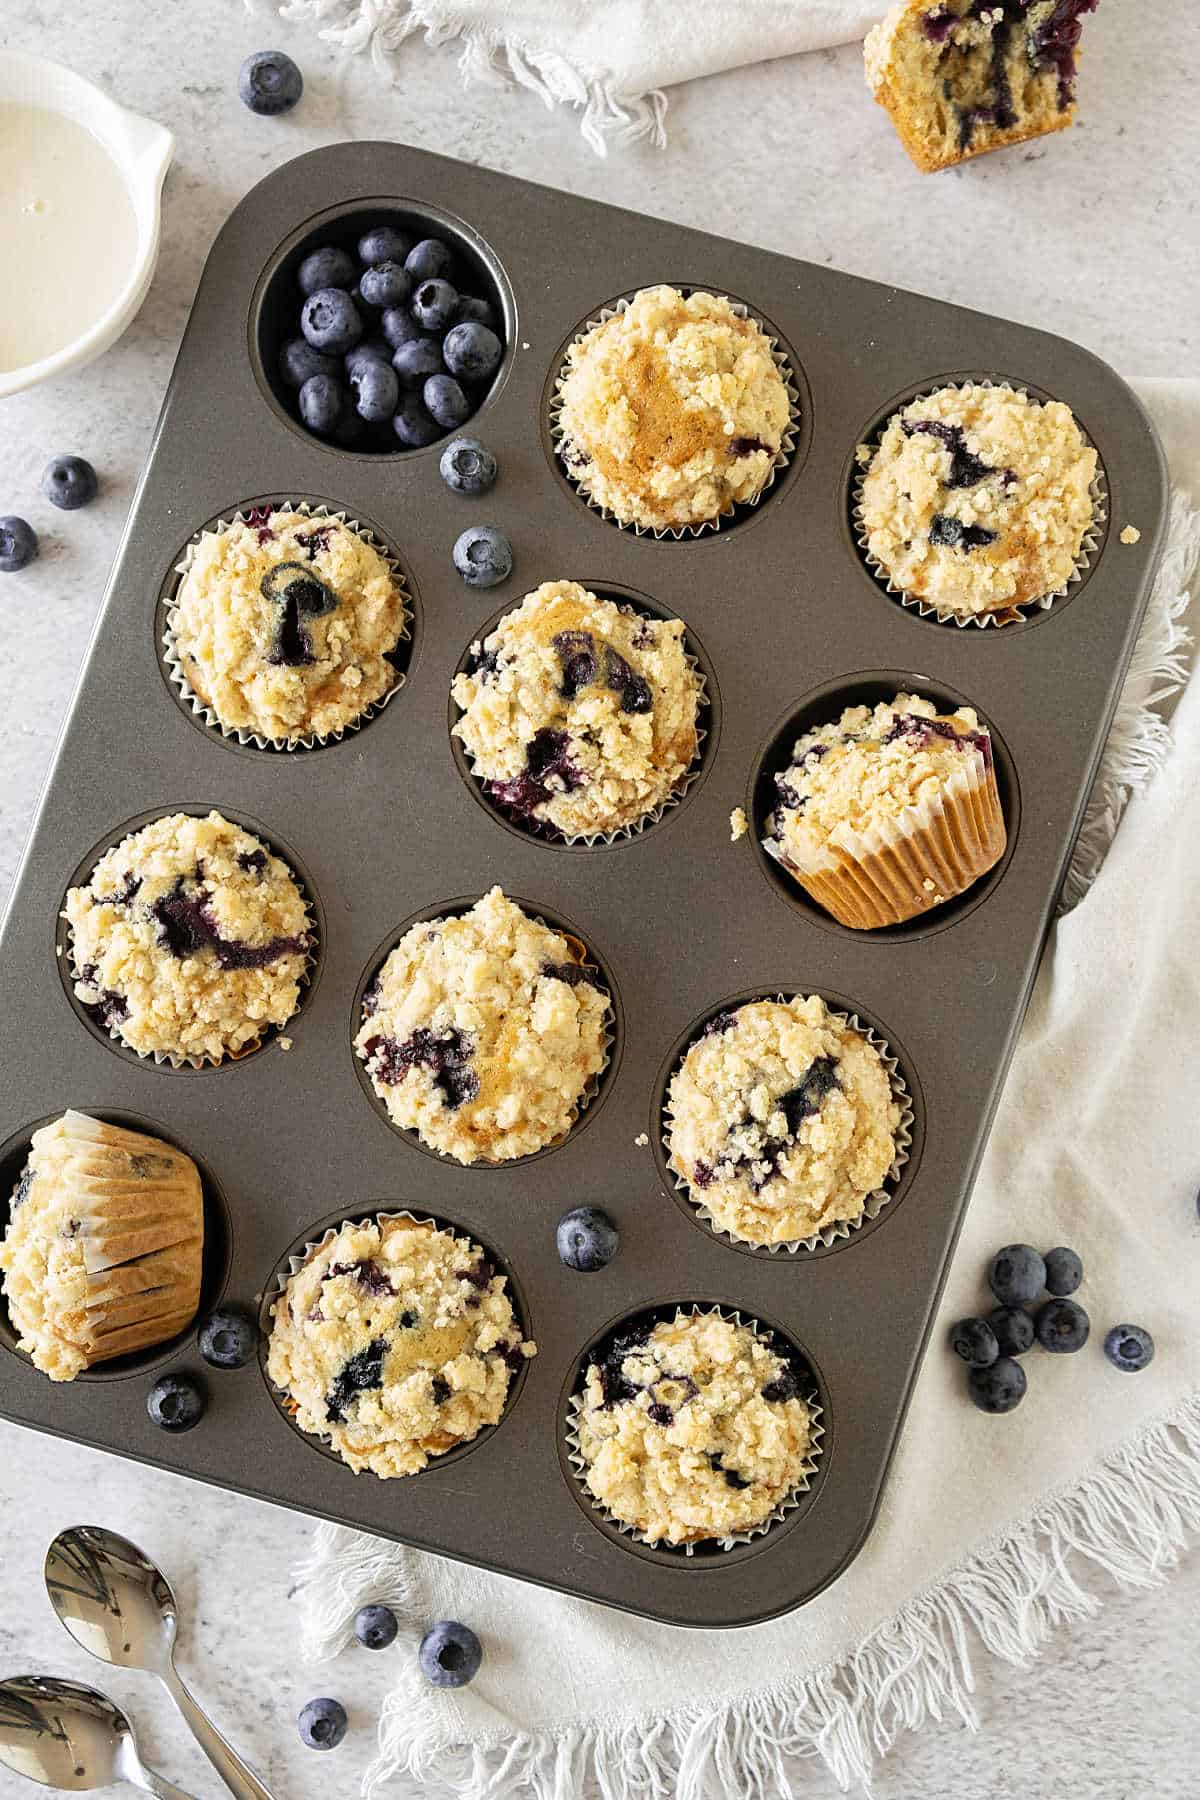 Metal pan with blueberry muffins with streusel topping. White surface with a white cloth.